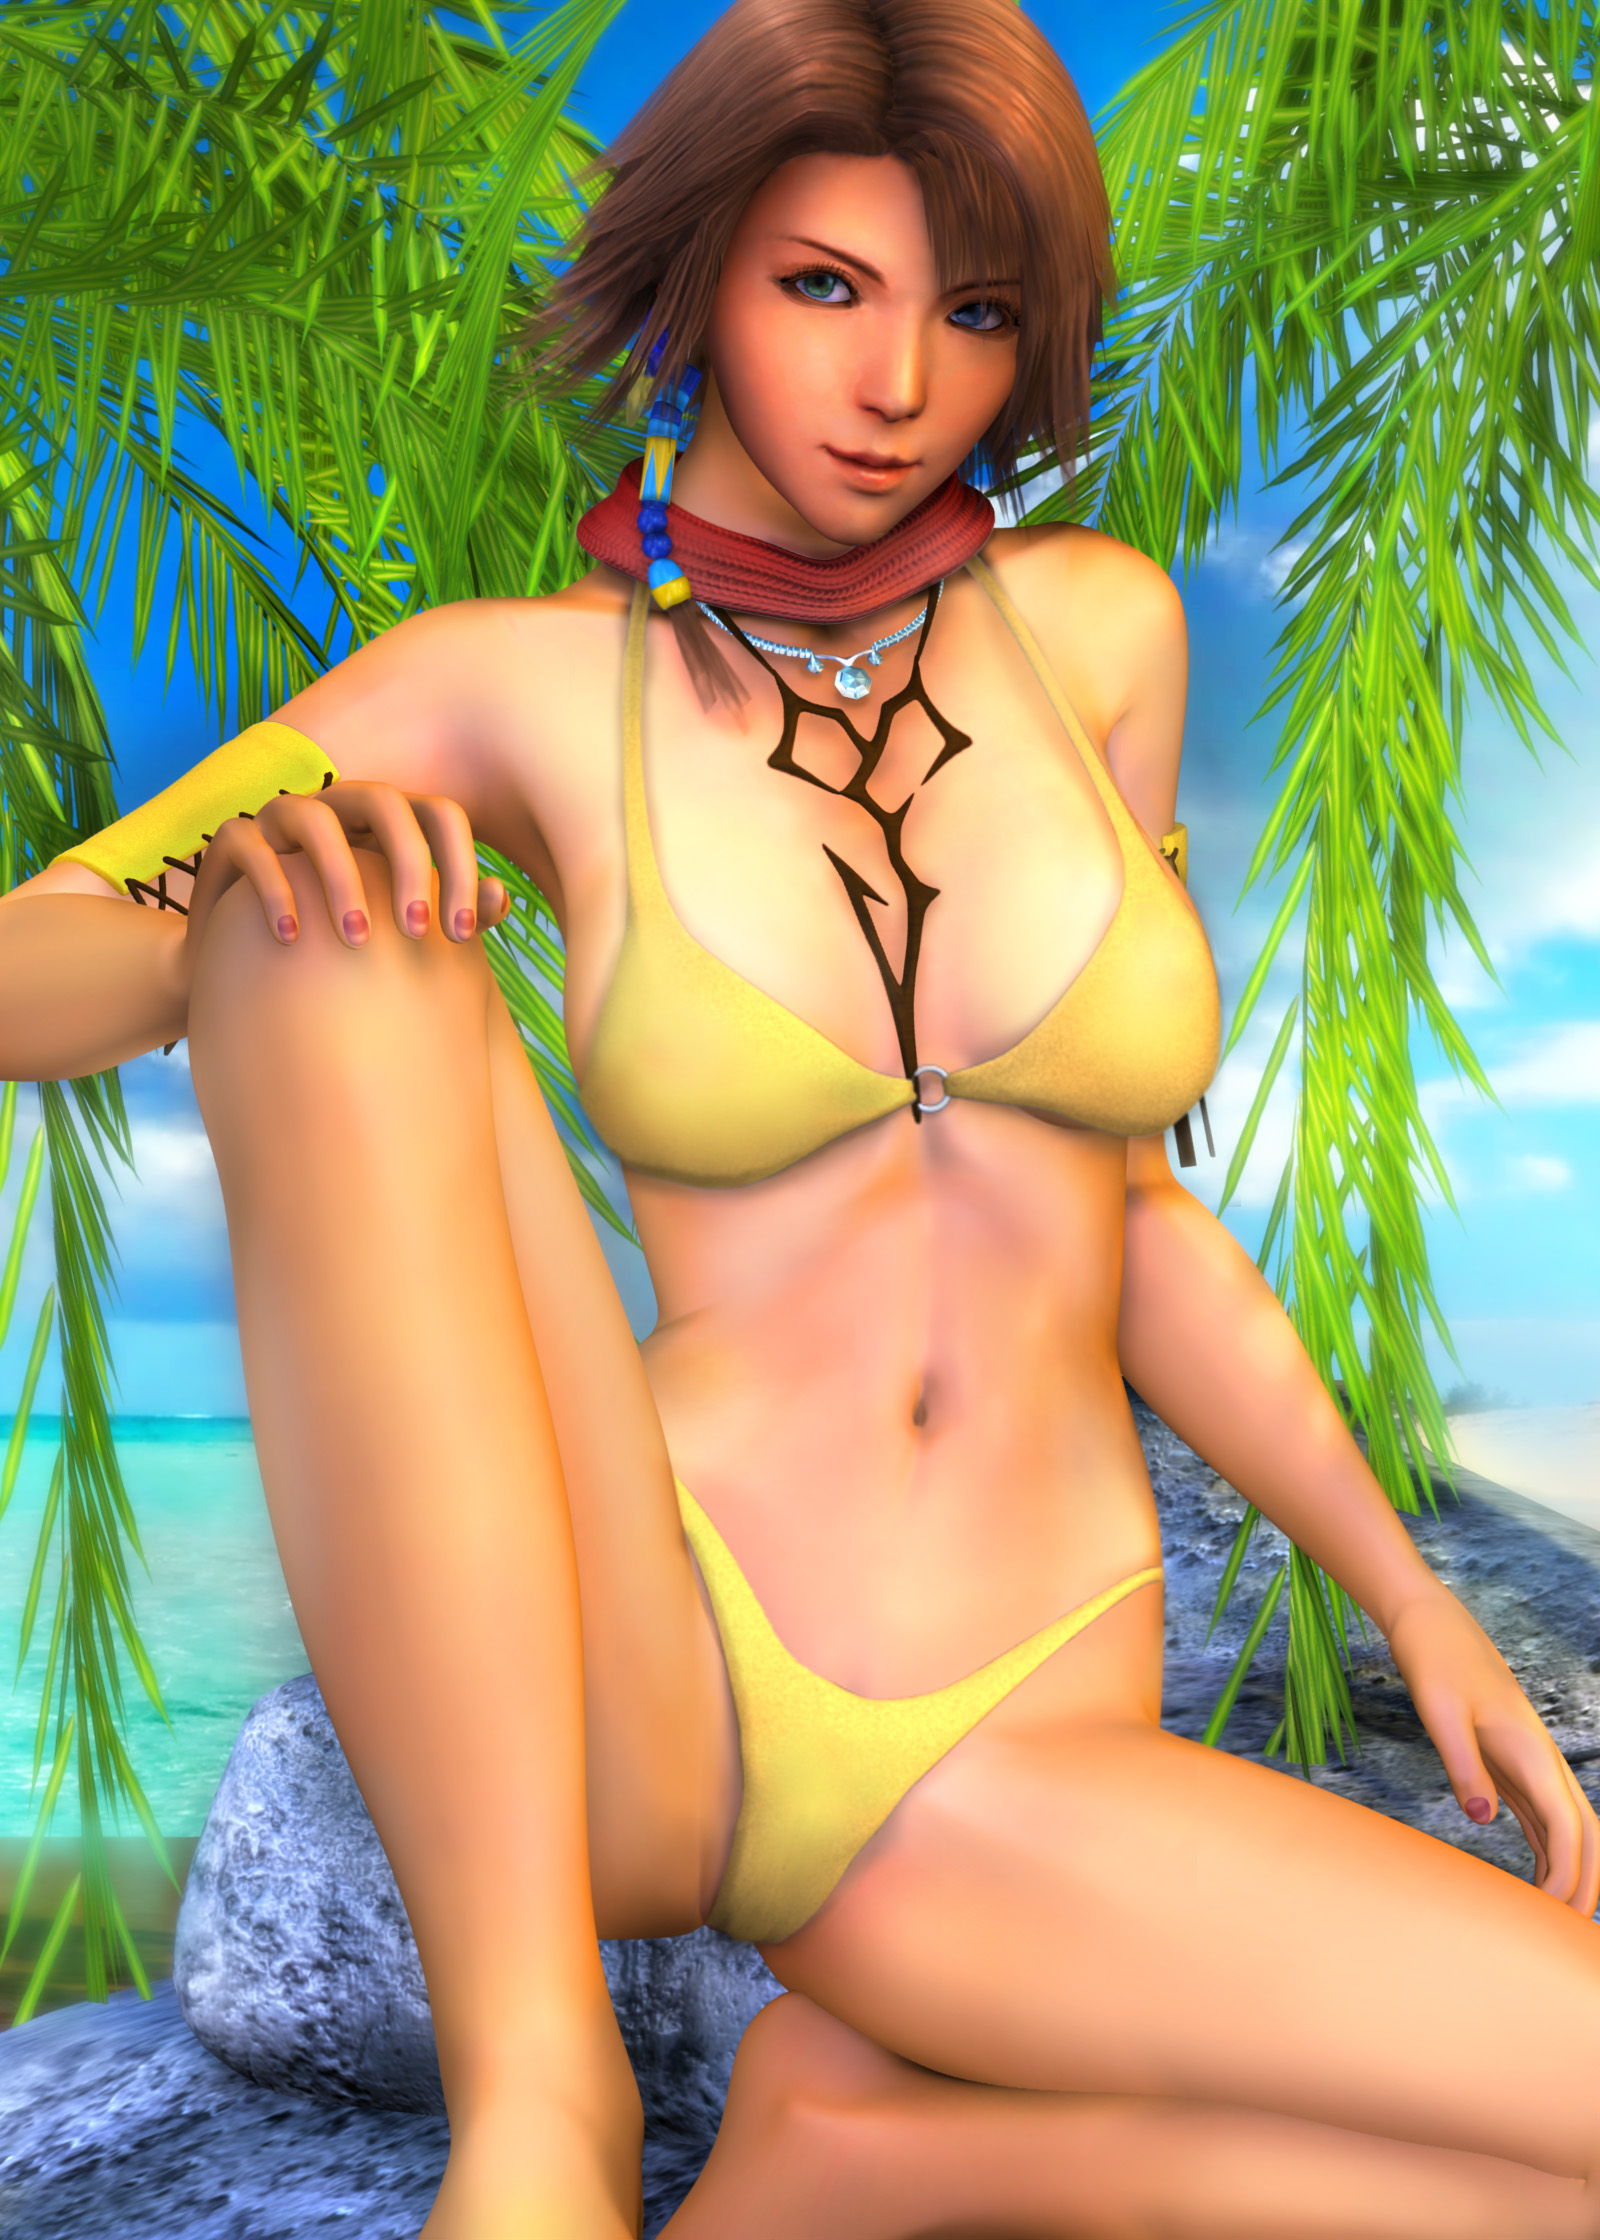 Yuna Commission By 3dbabes On Deviantart